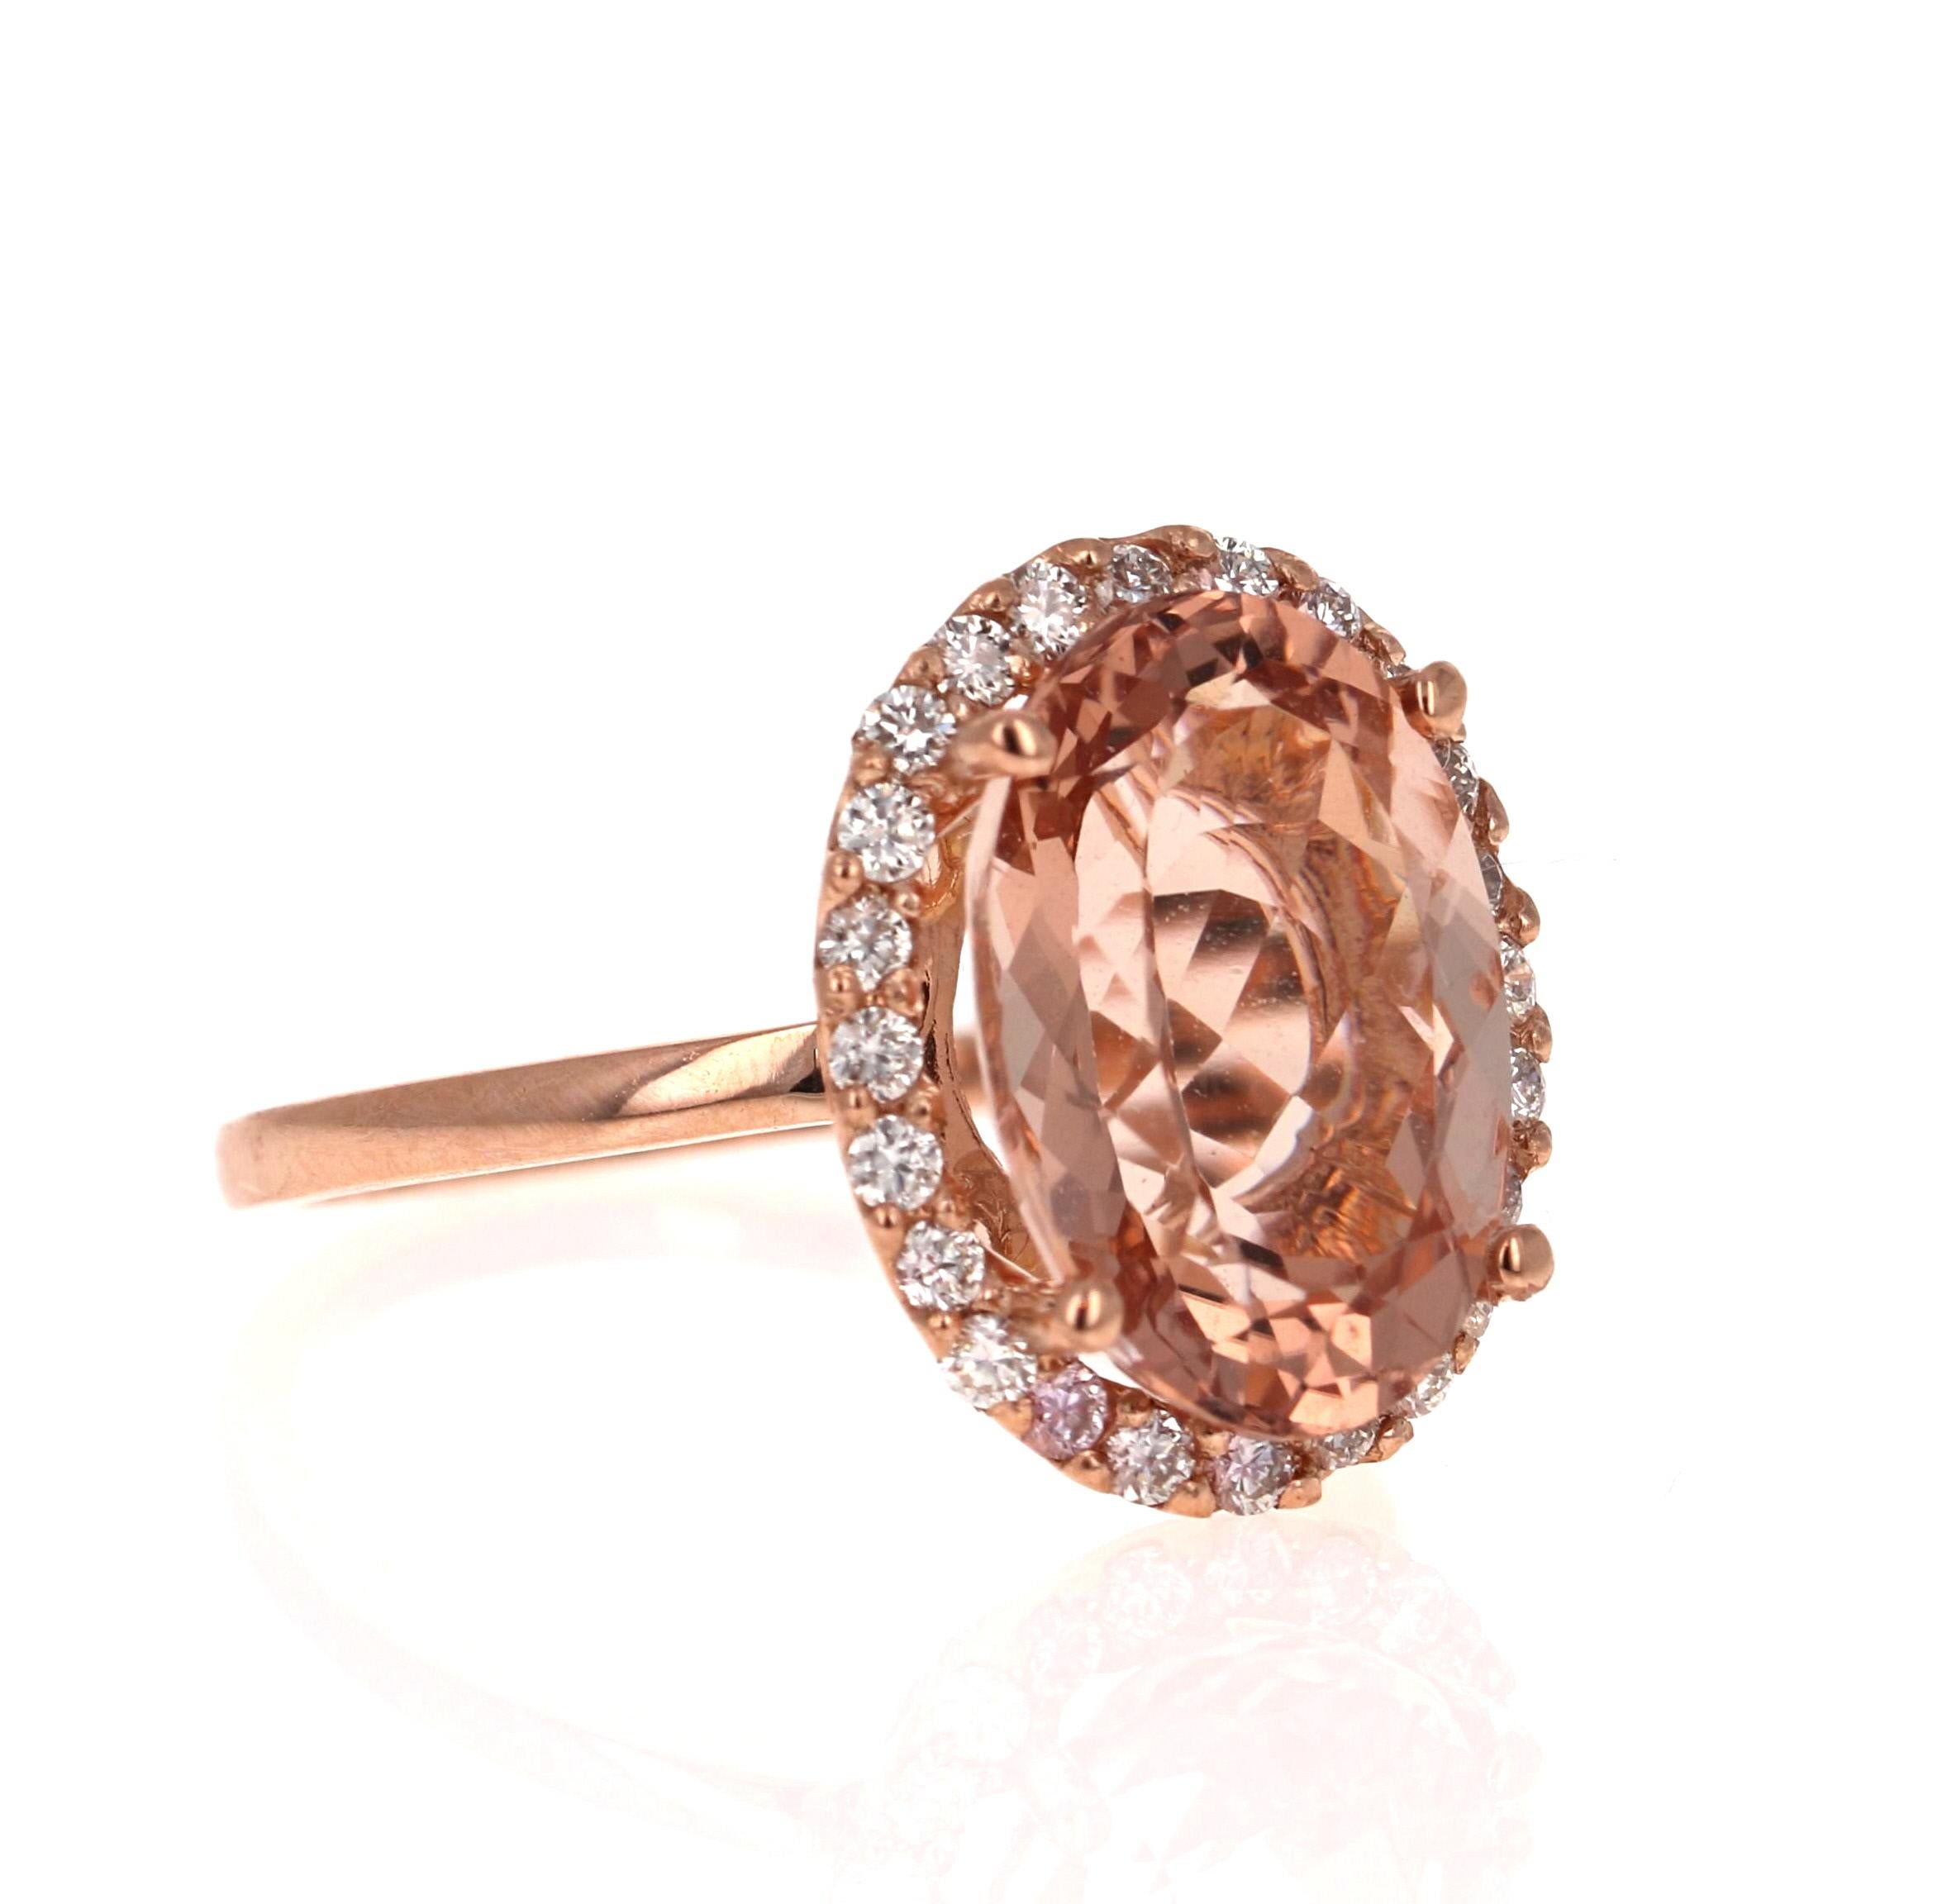 This Morganite ring has a beautiful 5.24 Carat Oval Cut Morganite and is surrounded by a simple halo of  24 Round Cut Diamonds that weigh 0.40 Carats.  The diamonds have a clarity of VS2 and a color of H. The total carat weight of the ring is 5.64